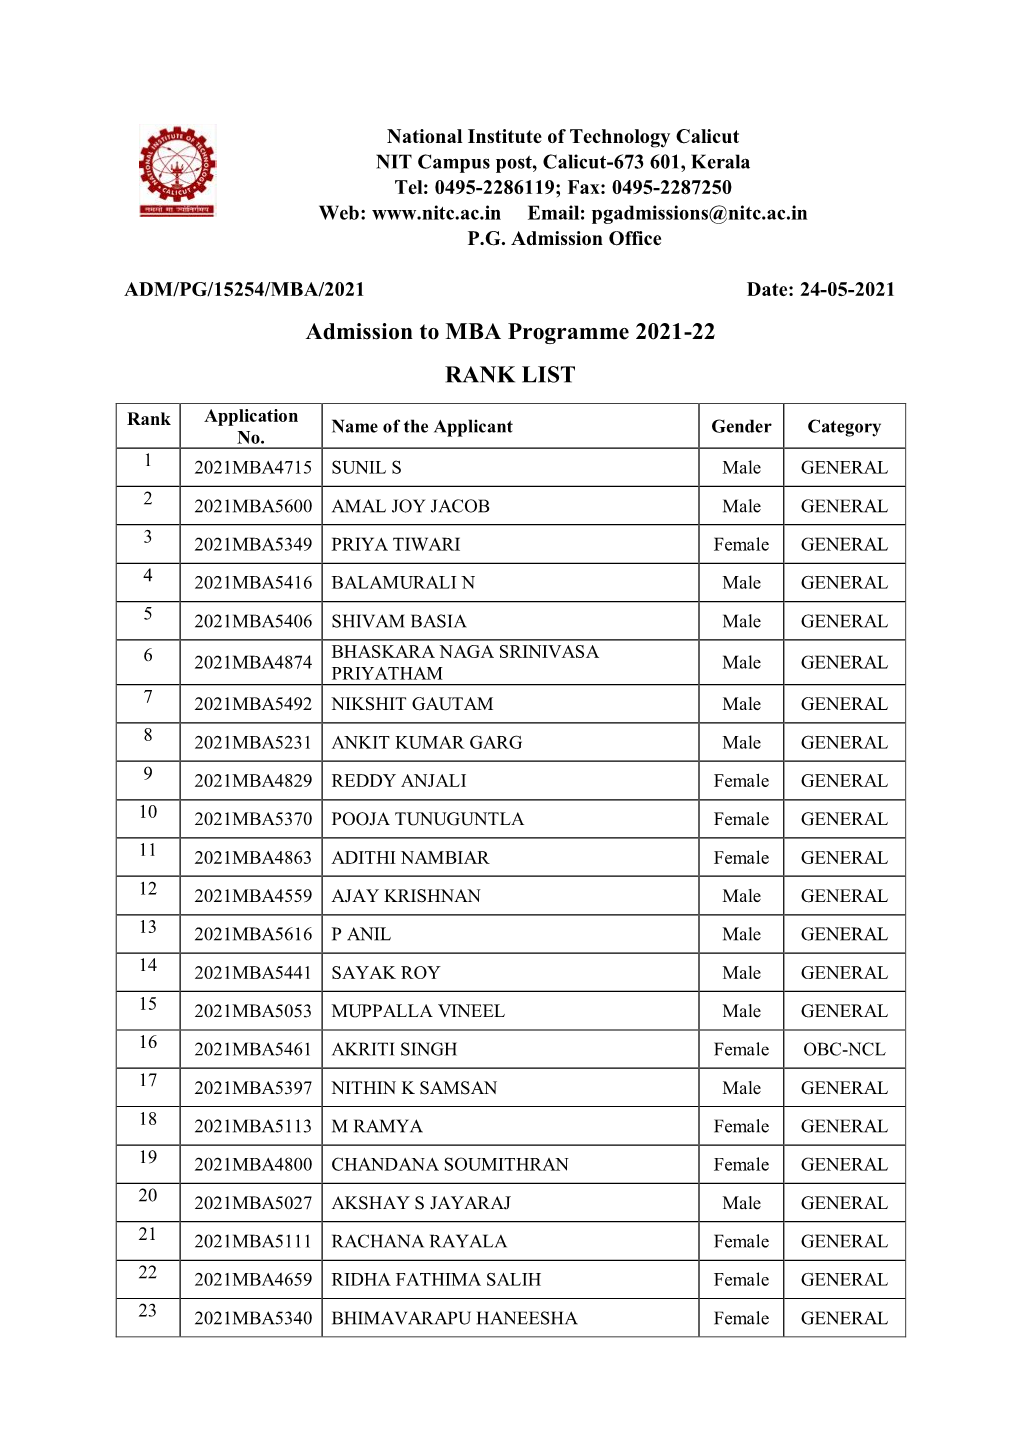 Rank List for Admission to MBA Programme